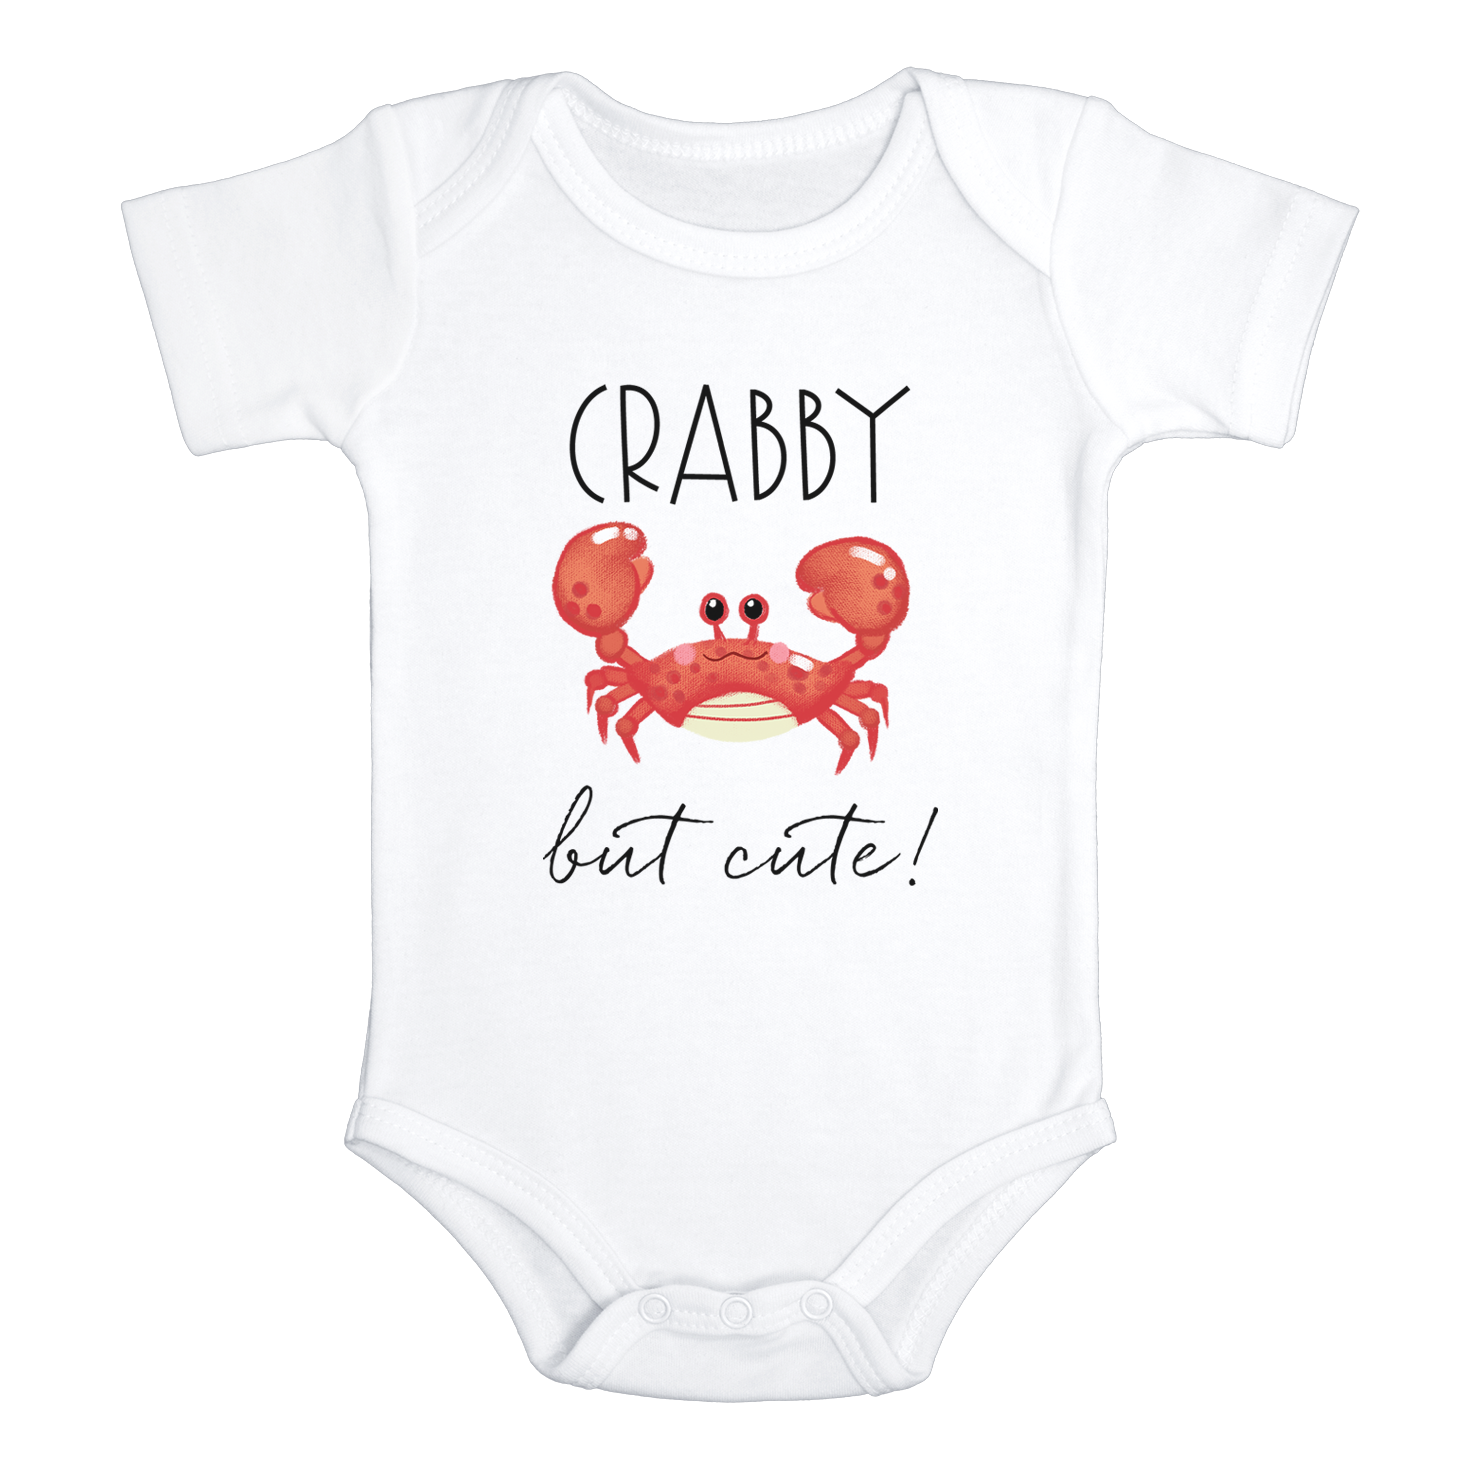 CRABBY BUT CUTE Funny baby onesies bodysuit (white: short or long sleeve)